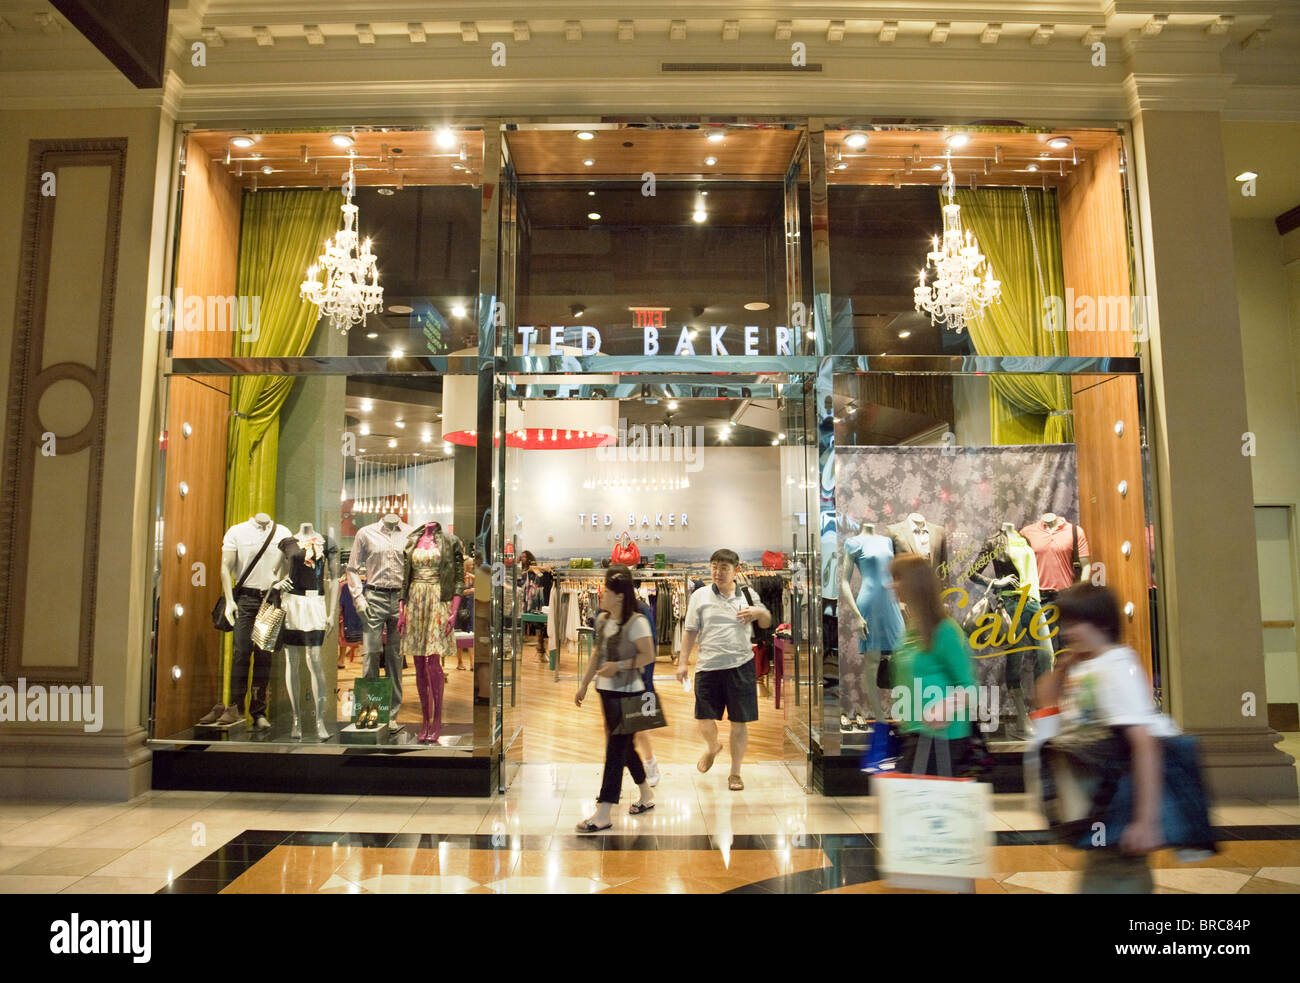 Ted baker store hi-res stock photography and images - Alamy